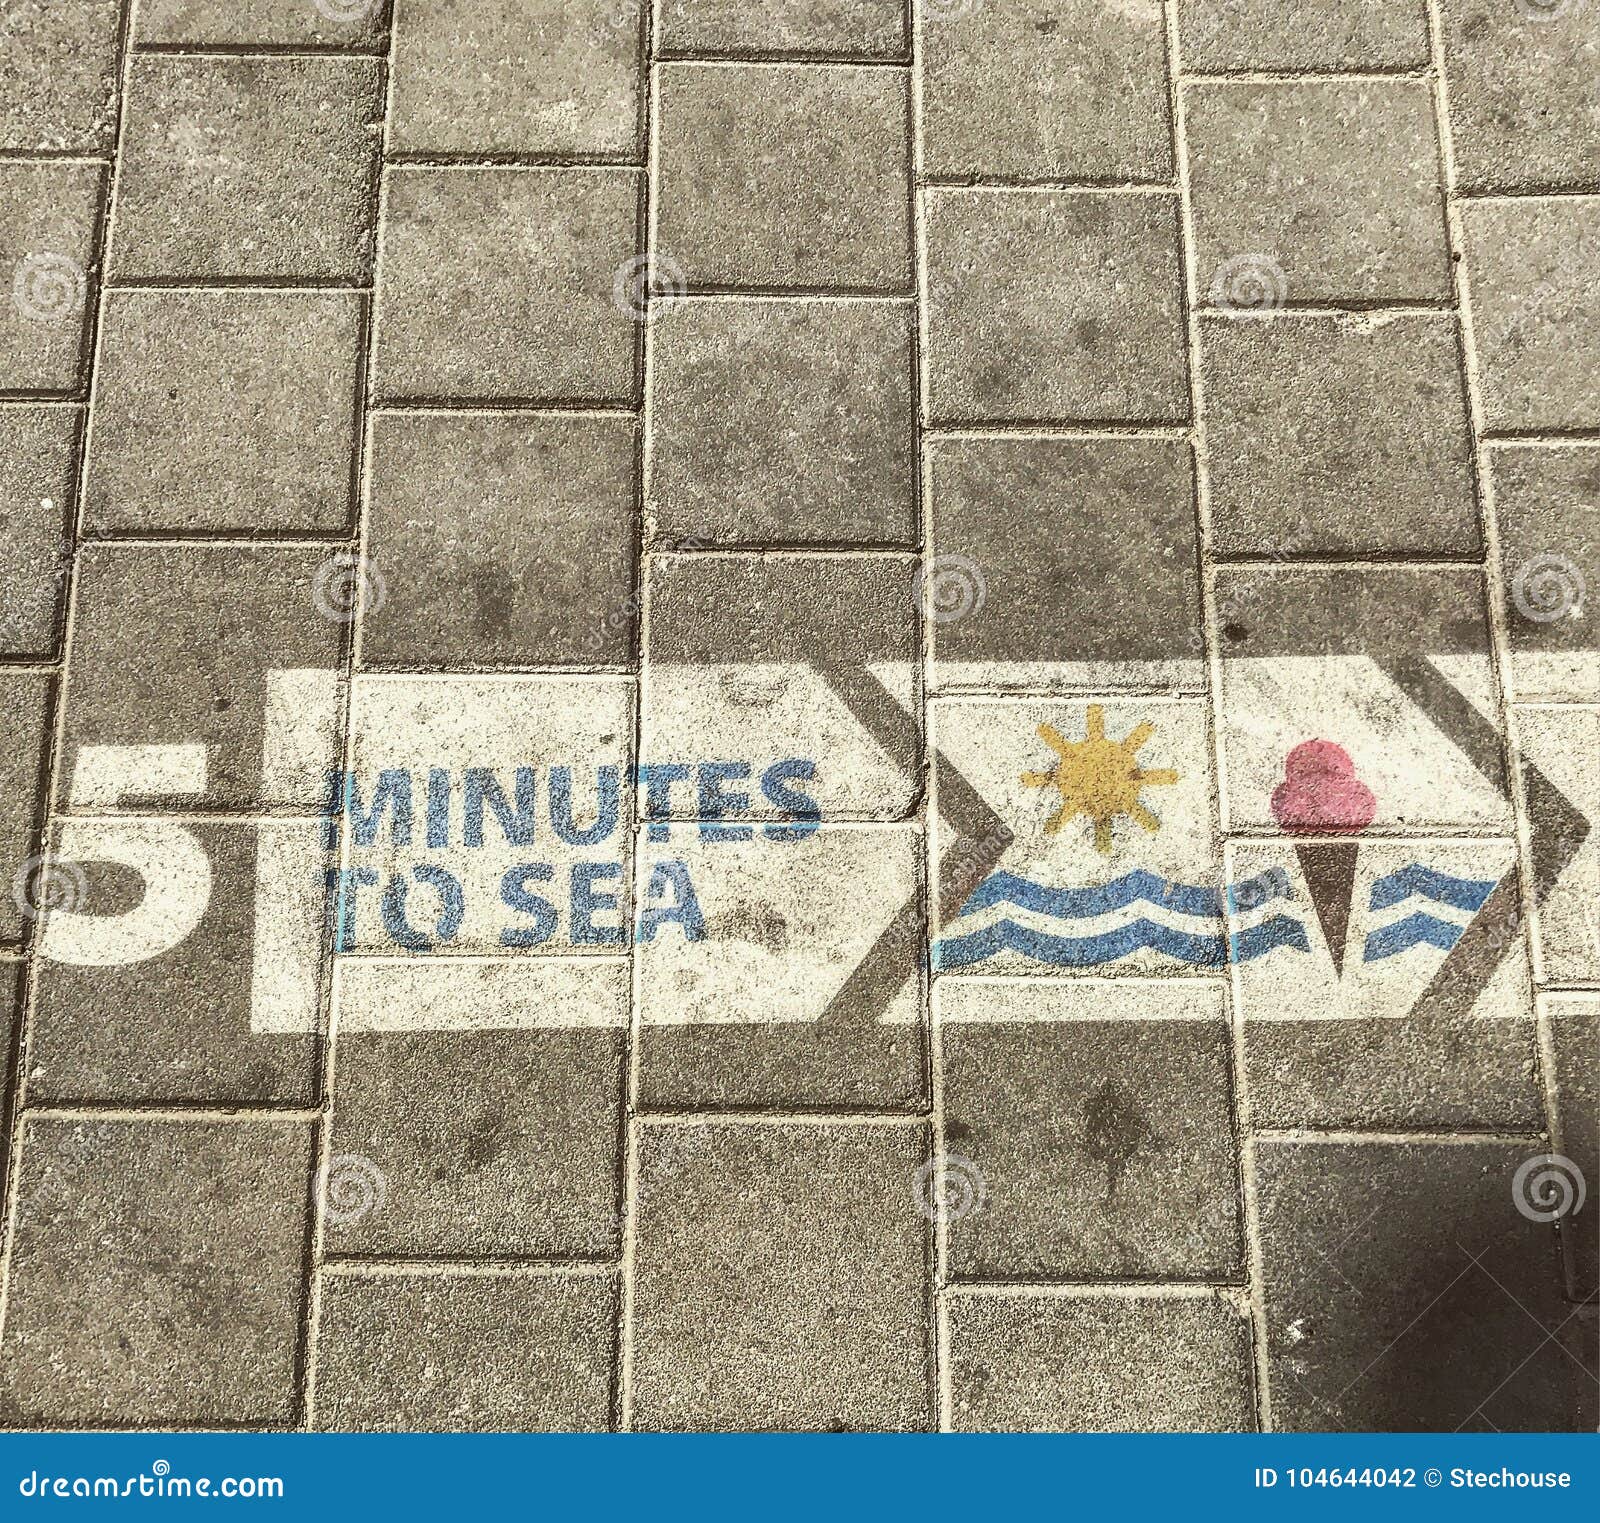 5 minutes to the sea - a sidewalk in tel aviv directs people to the mediterranean